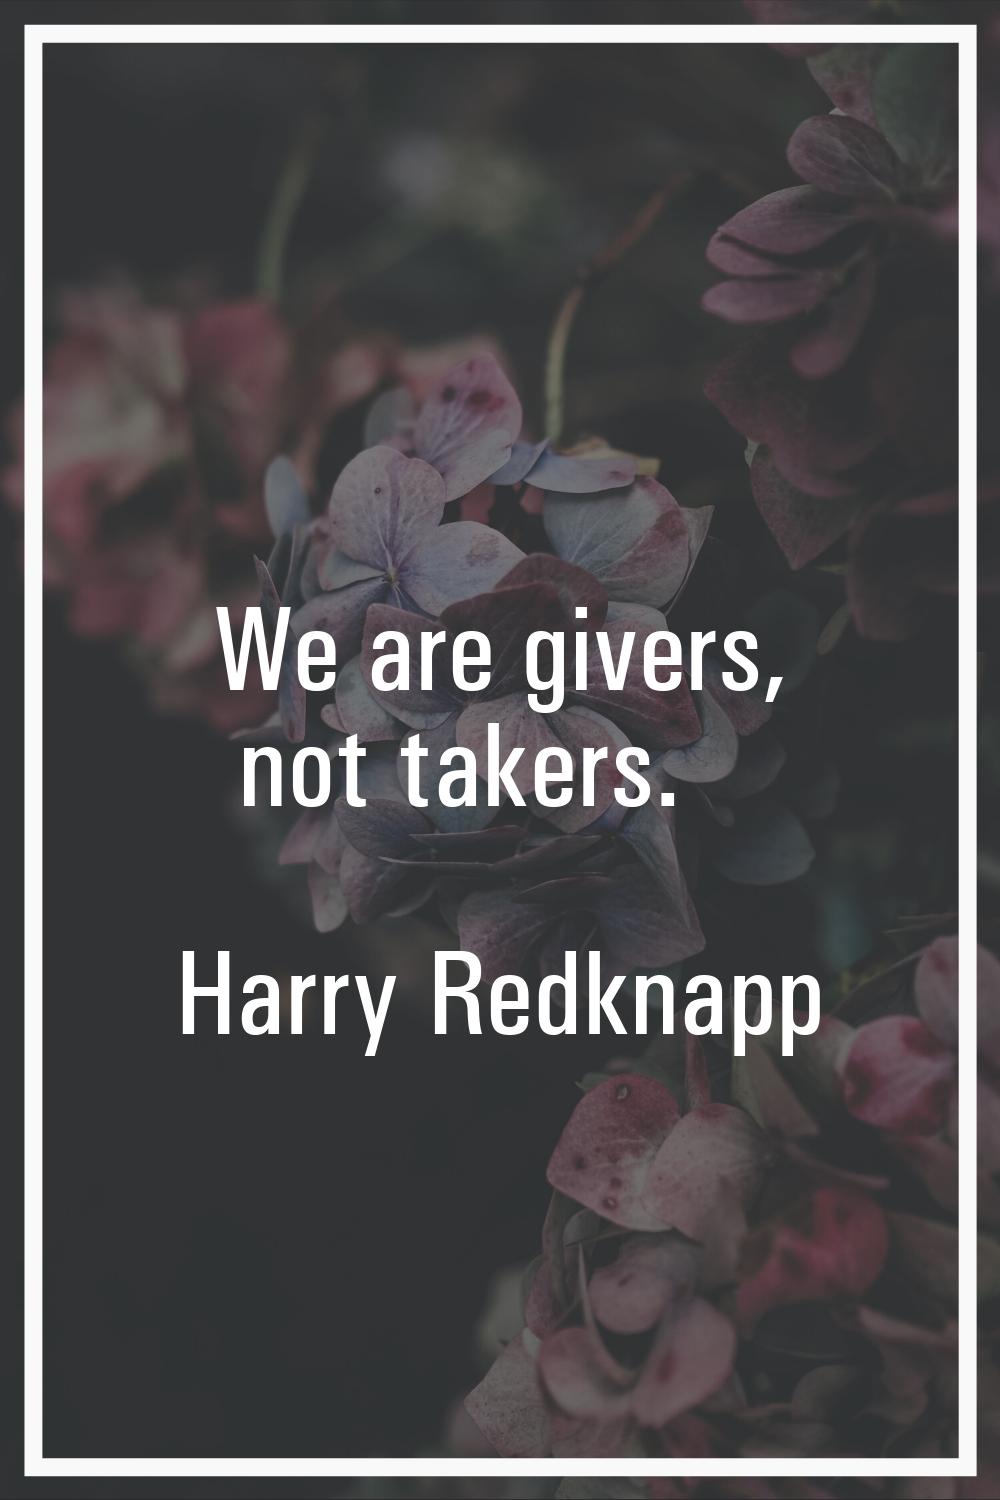 We are givers, not takers.